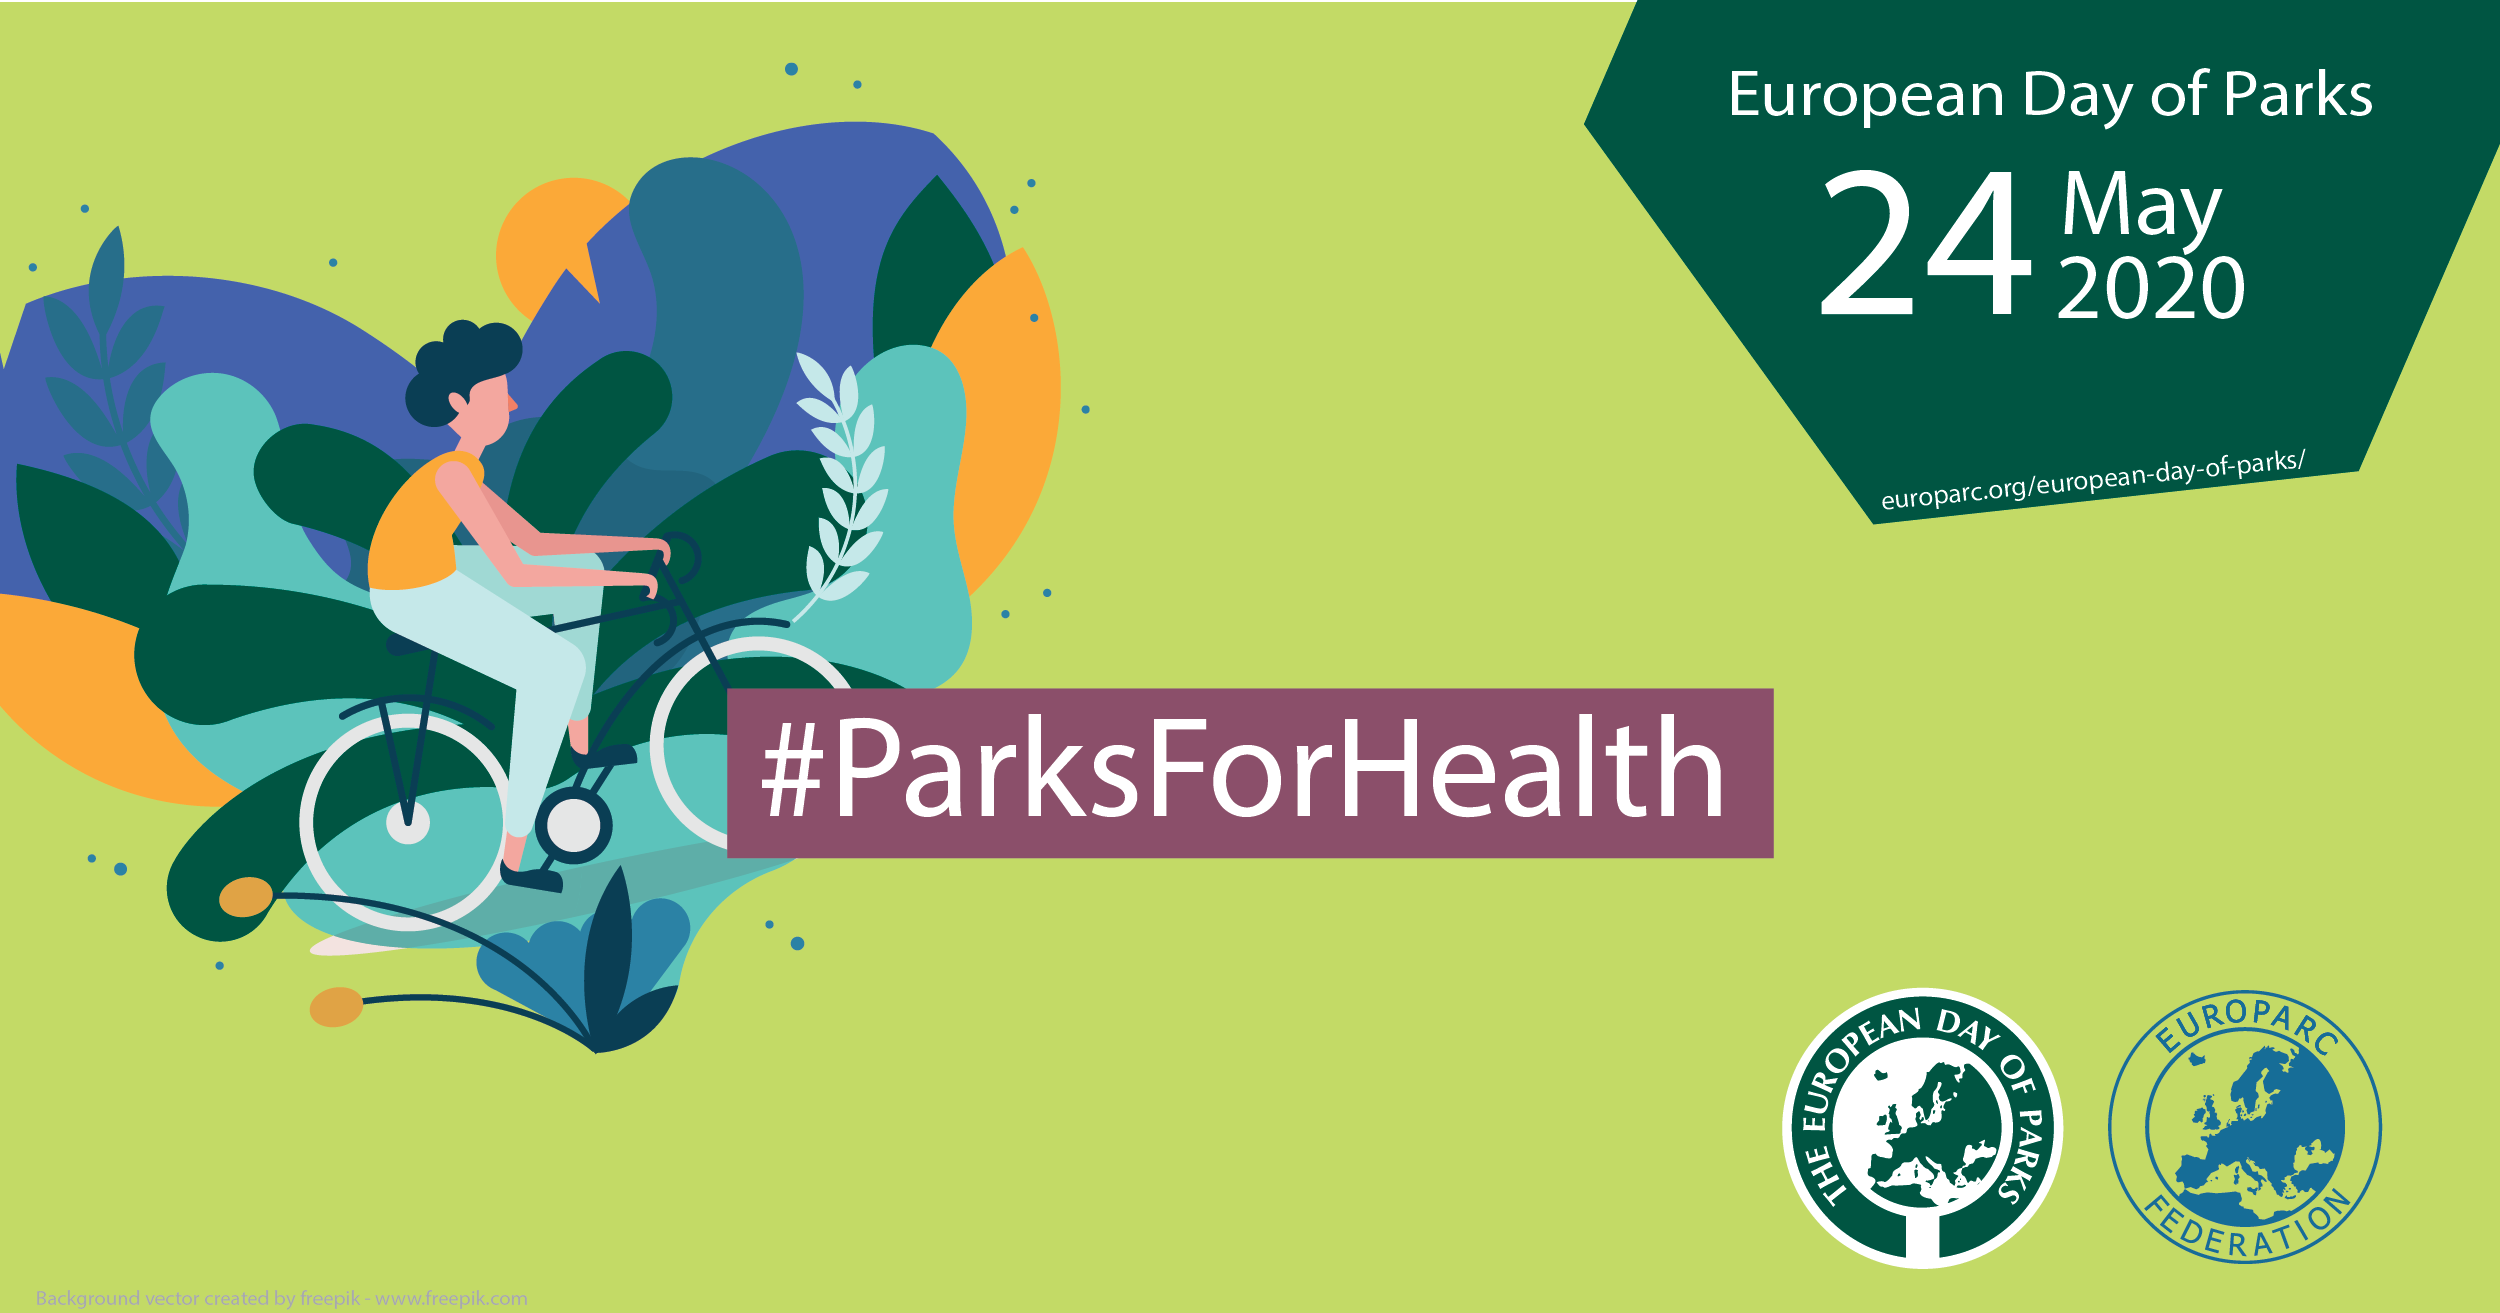 Celebrate European Parks Day by Sending Photos Showing How Parks Keep us Healthy